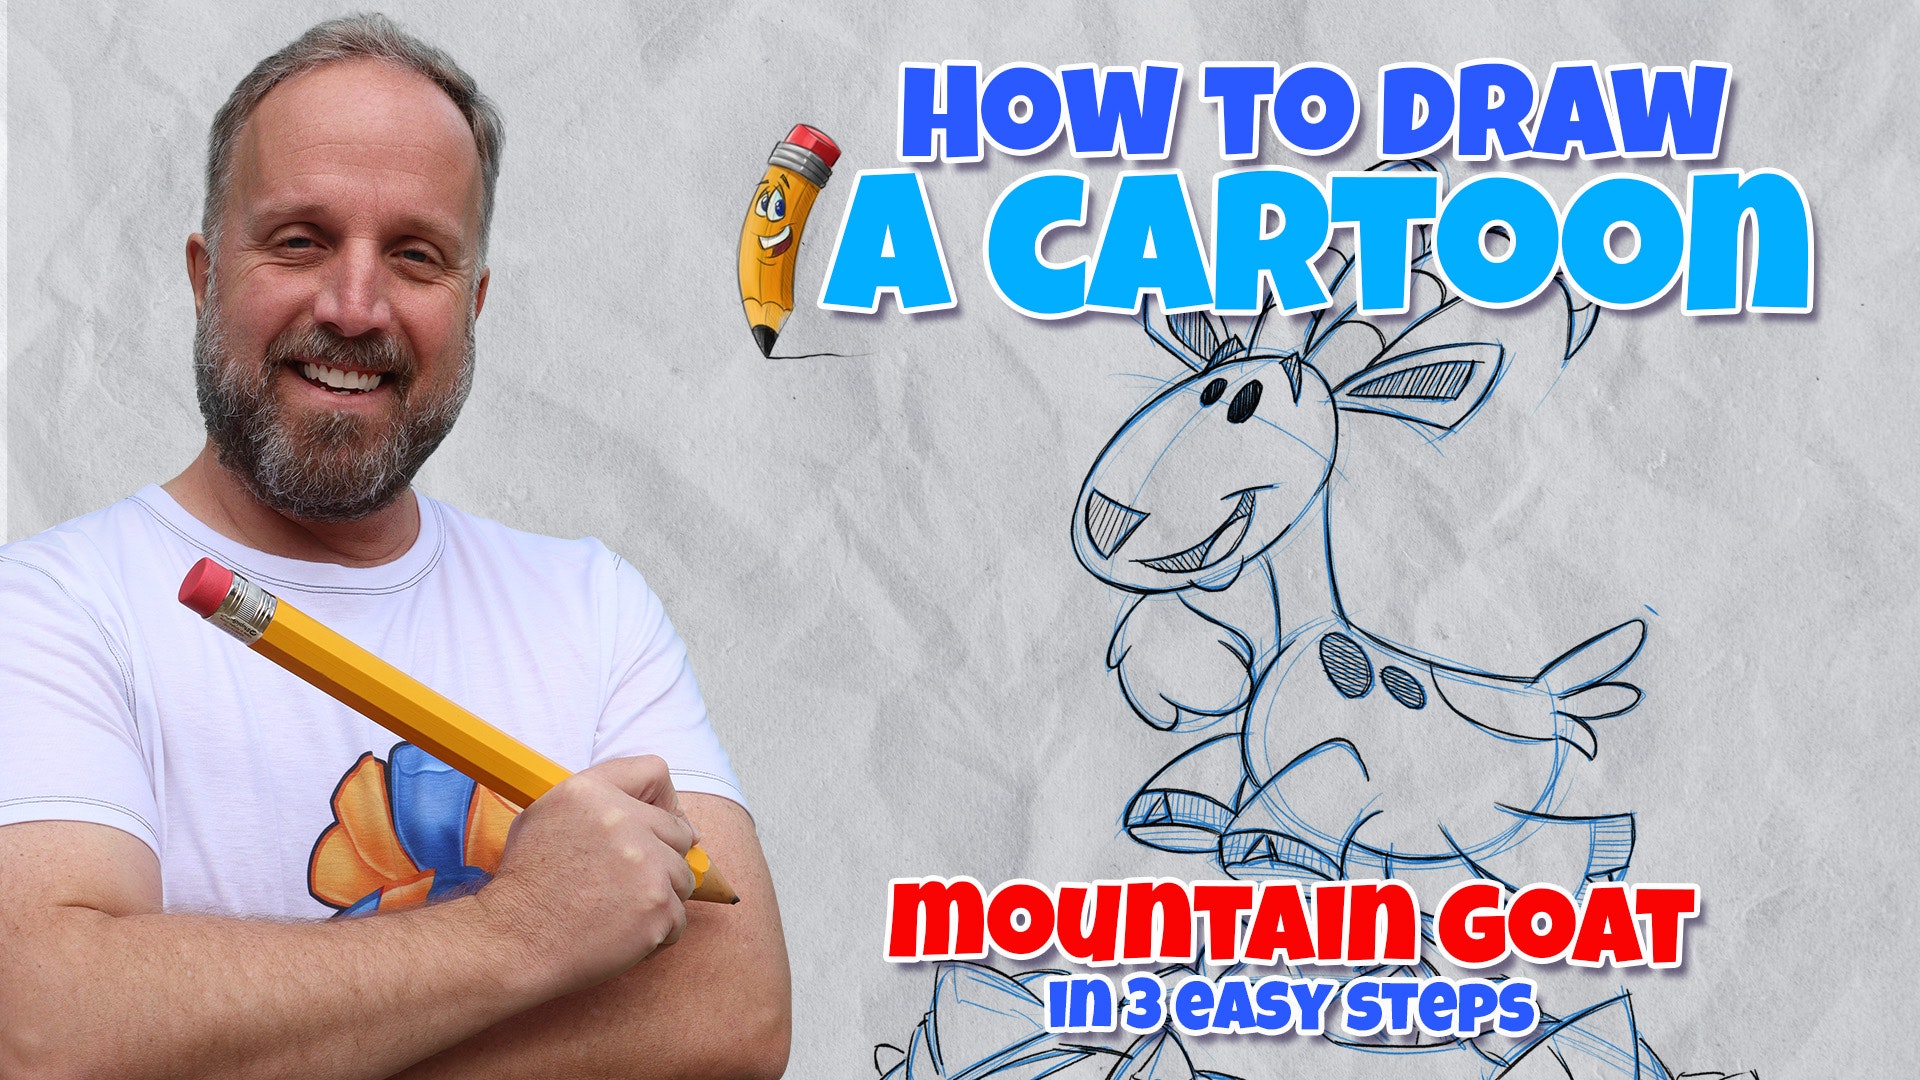 How to draw a mountain goat step by step | Sheep drawing, Big horn sheep,  Mountain goat